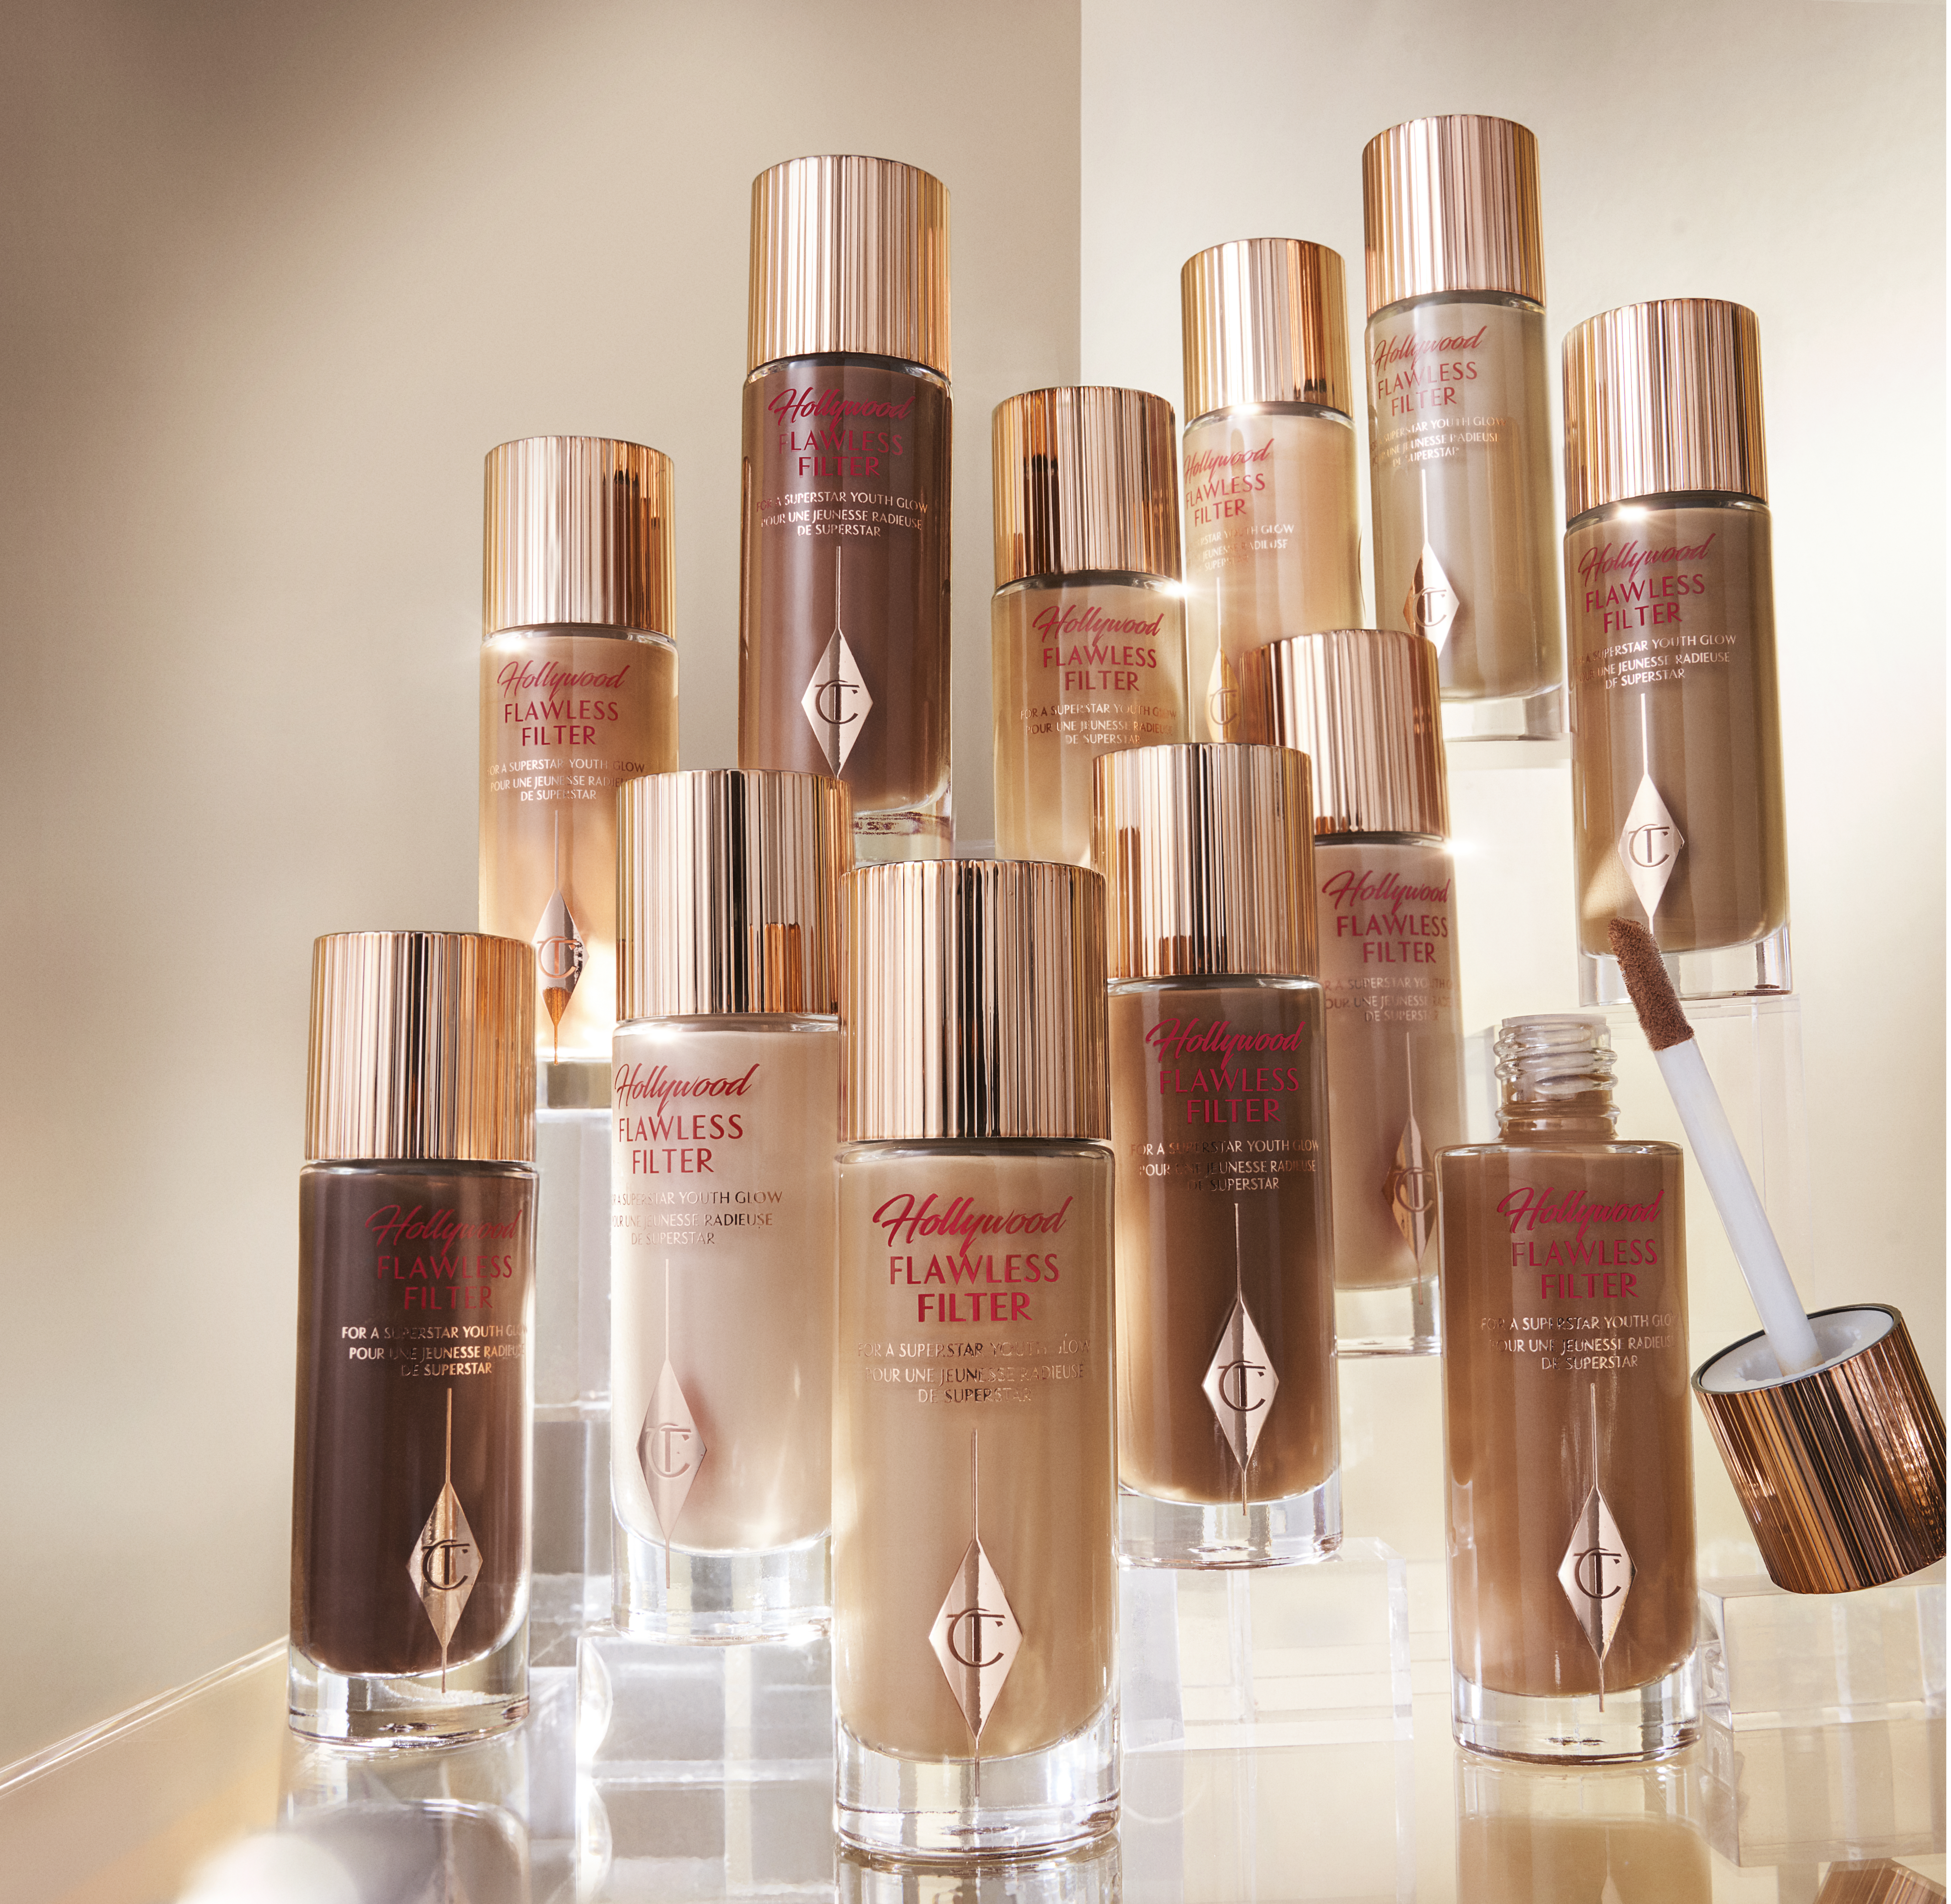 Collection of glowy primers in fair, light, tan, and deep shades in glass bottles with gold-coloured lids and doe-foot applicators.